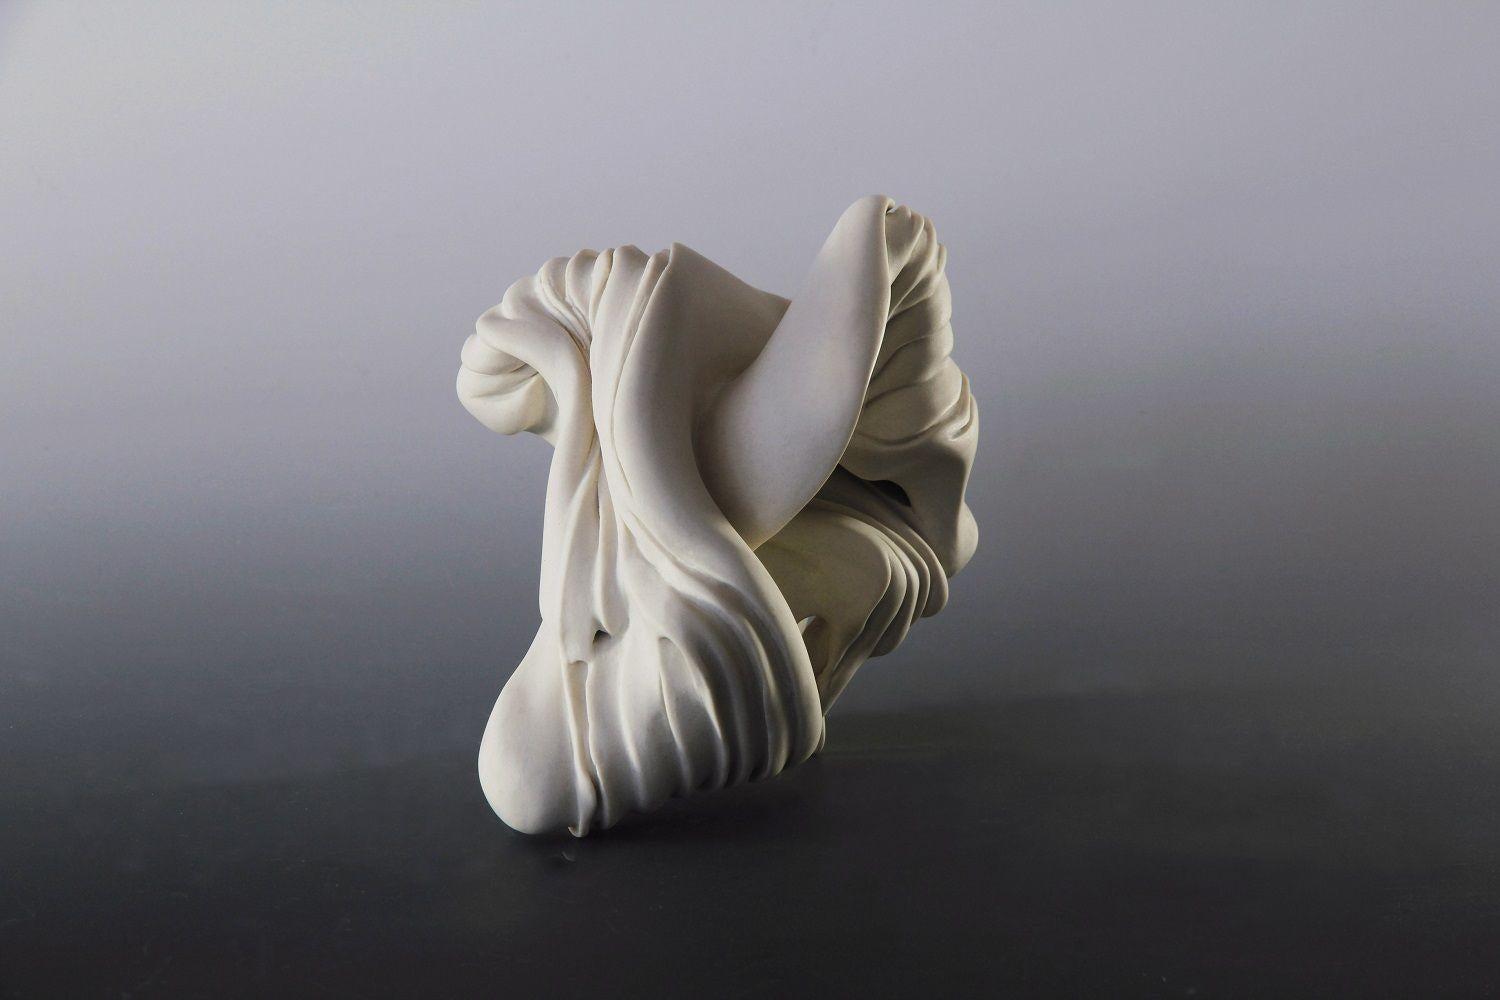 Shell is a unique sculpture by contemporary artist Sharon Brill. This is a wheel thrown altered and sandblasted porcelain sculpture, sold with a stand made of painted clay, dimensions are 11 × 16 × 9 cm
(4.3 × 6.3 × 3.5 in).

Sharon Brill’s